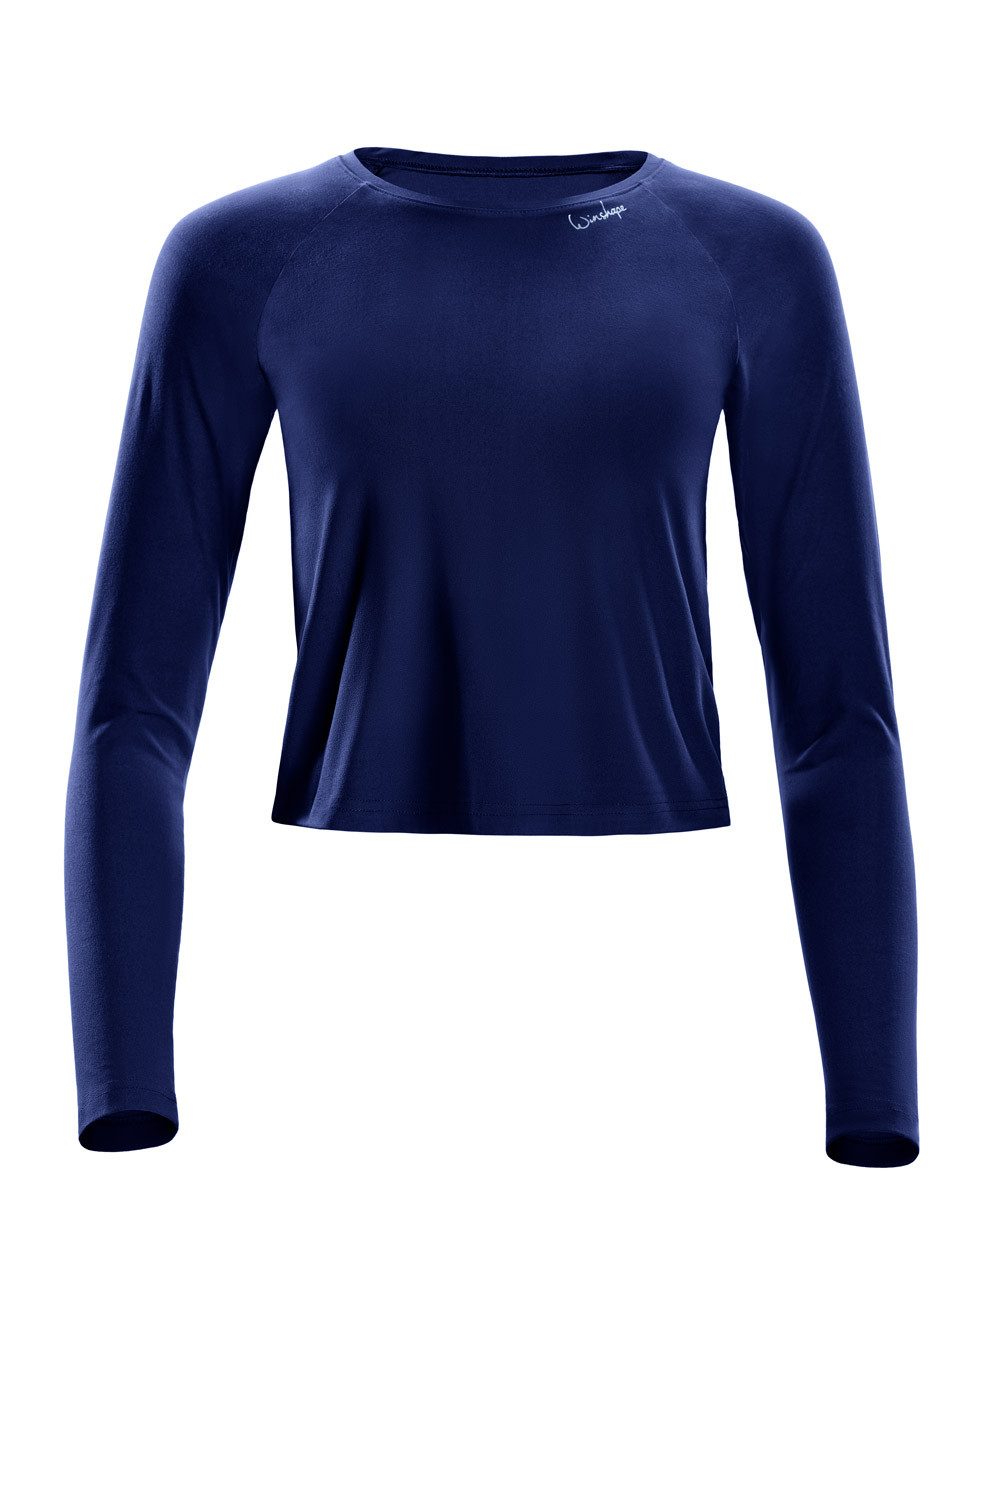 Functional Light and Soft Cropped Long Sleeve Top AET119LS, dark blue,  Winshape Ultra Soft Style